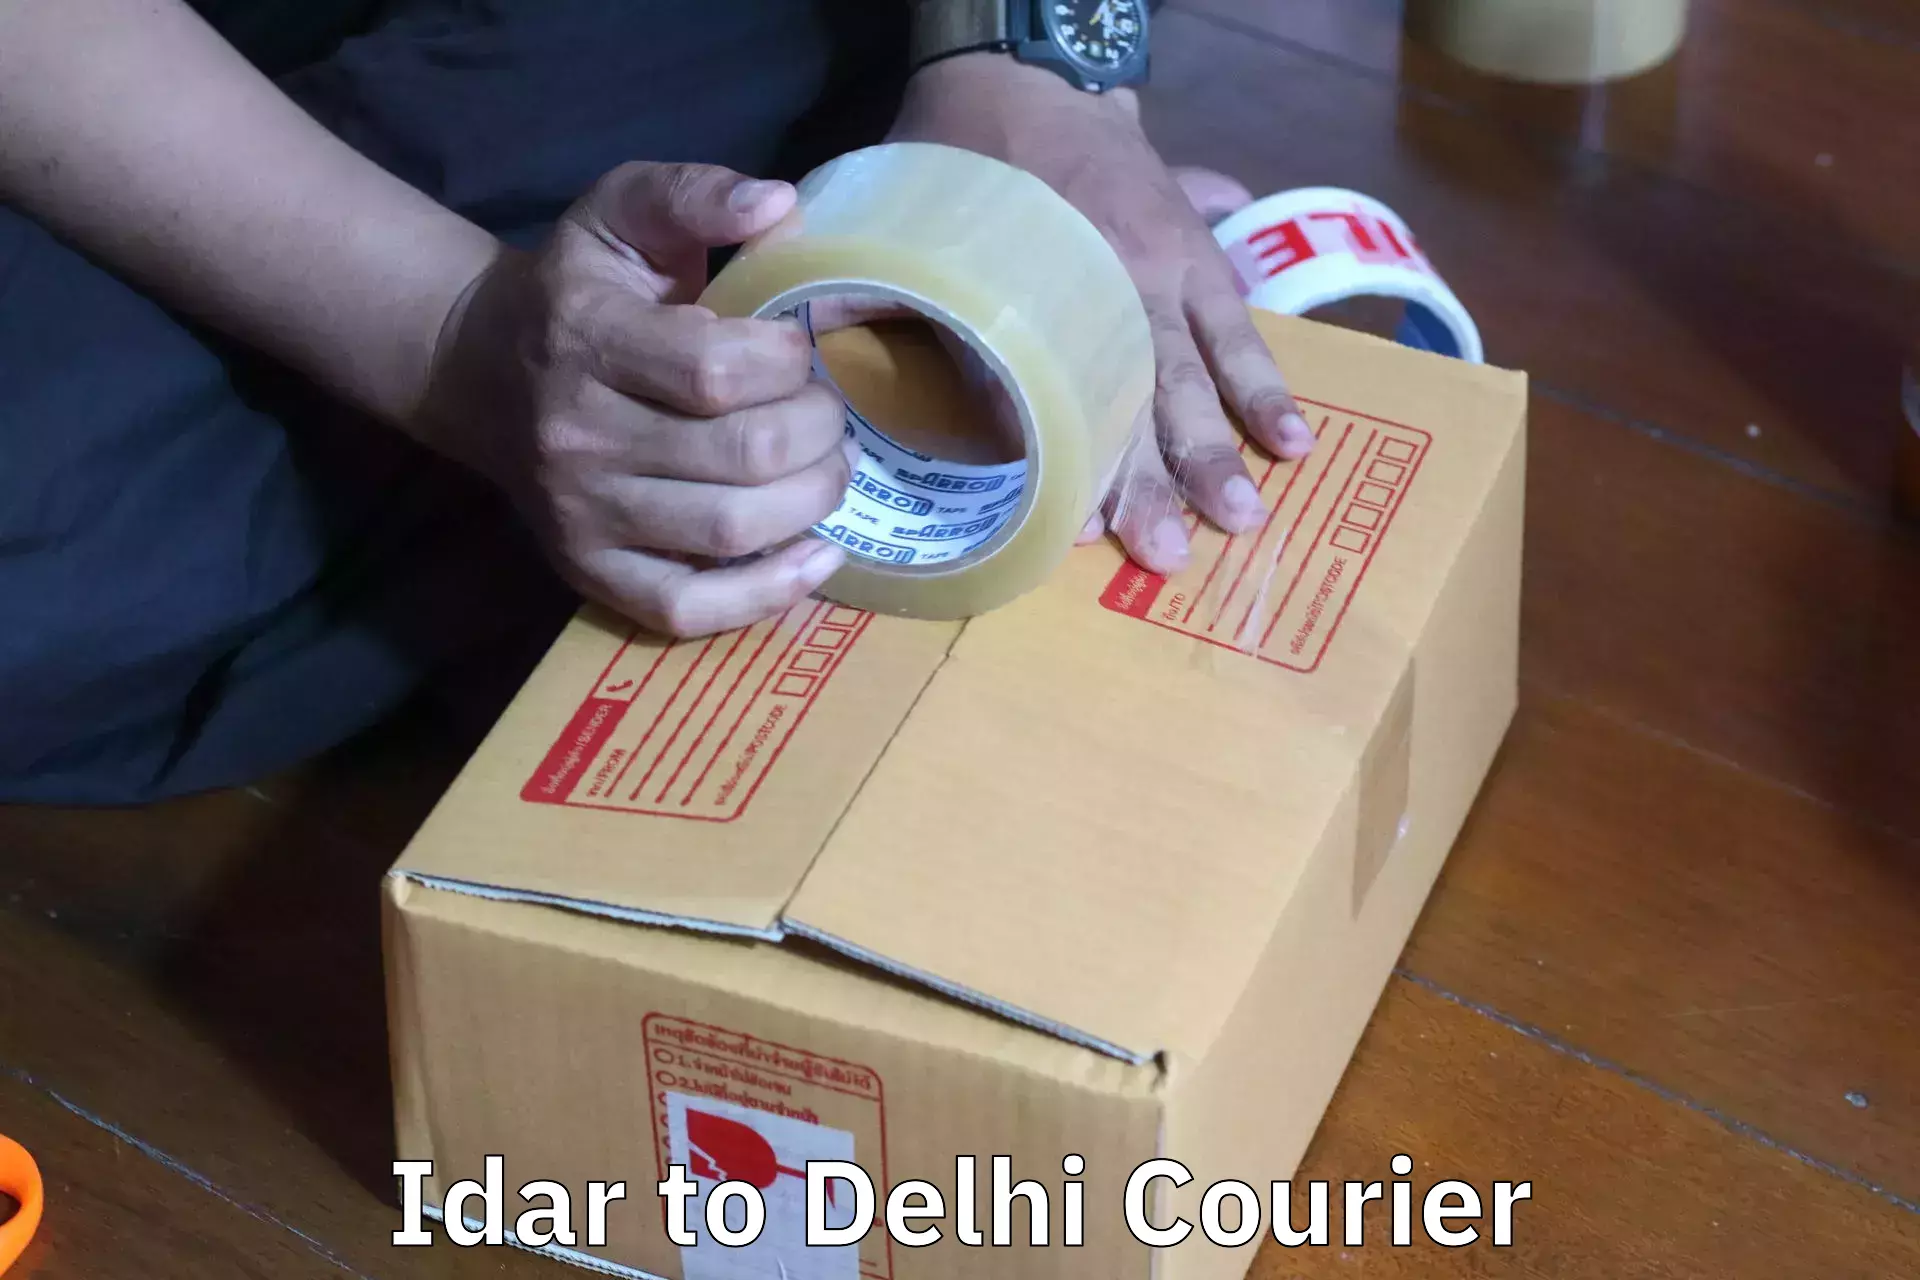 Long-distance moving services Idar to Delhi